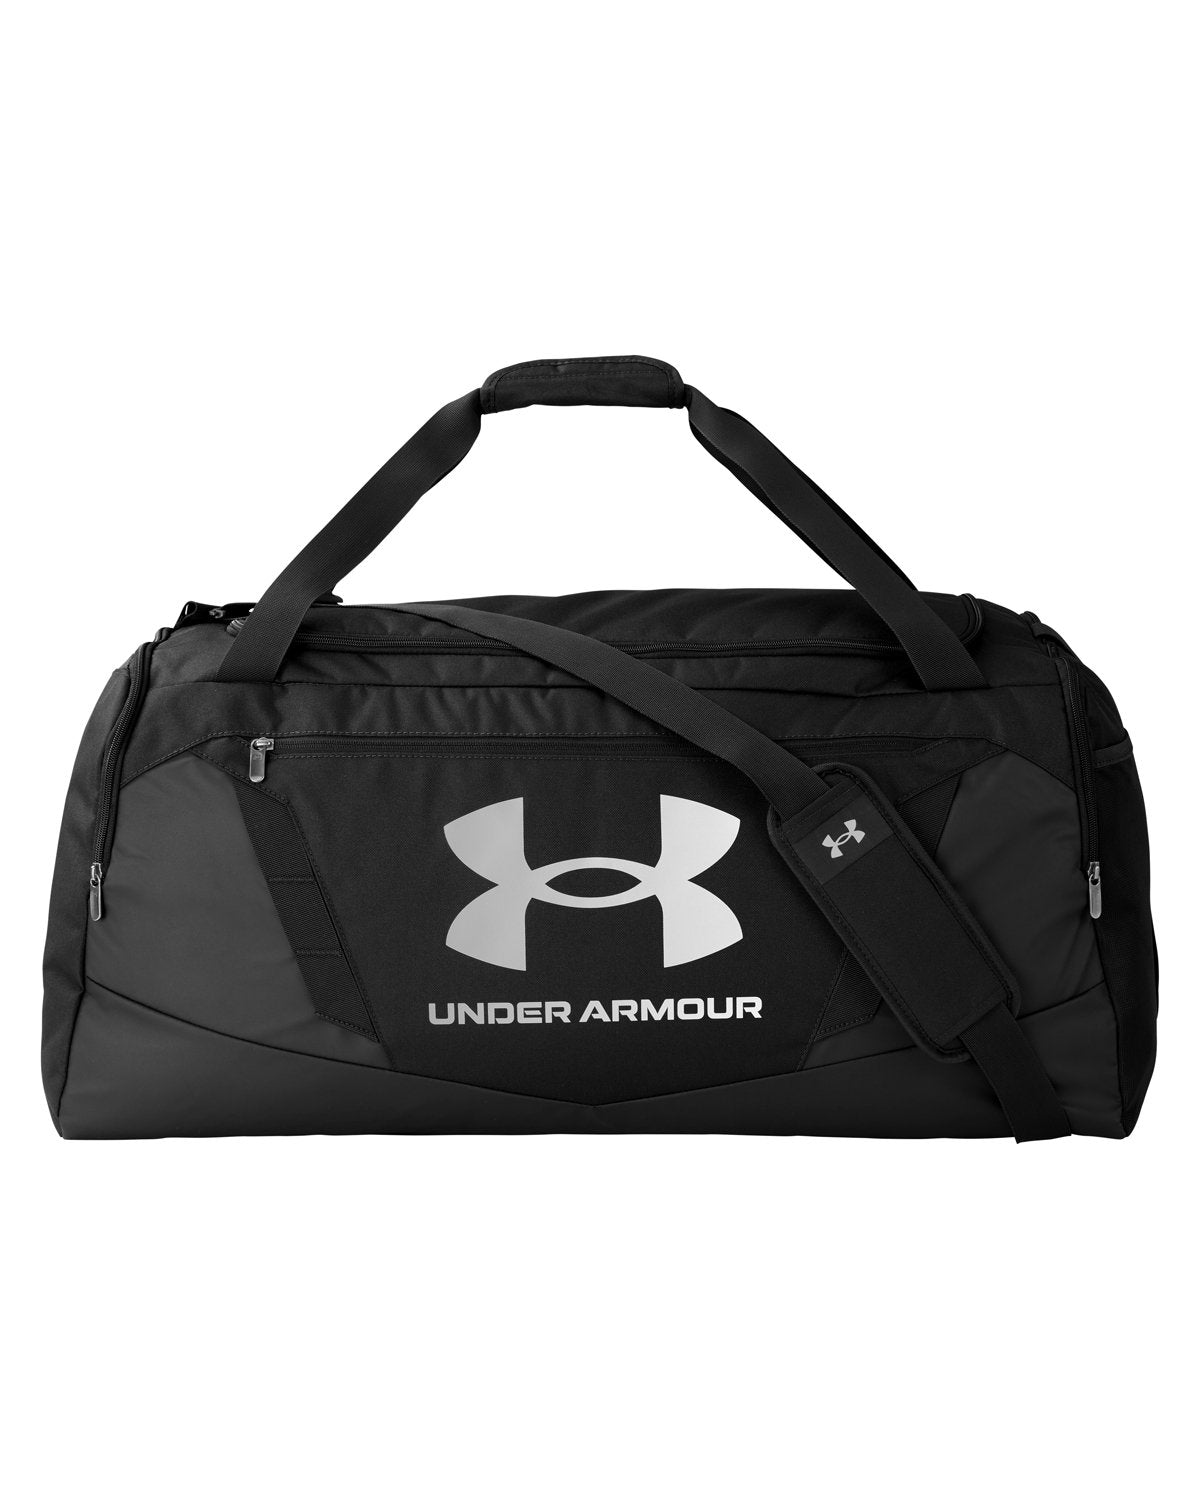 Under Armour Black/ Mate Silver 1369224 